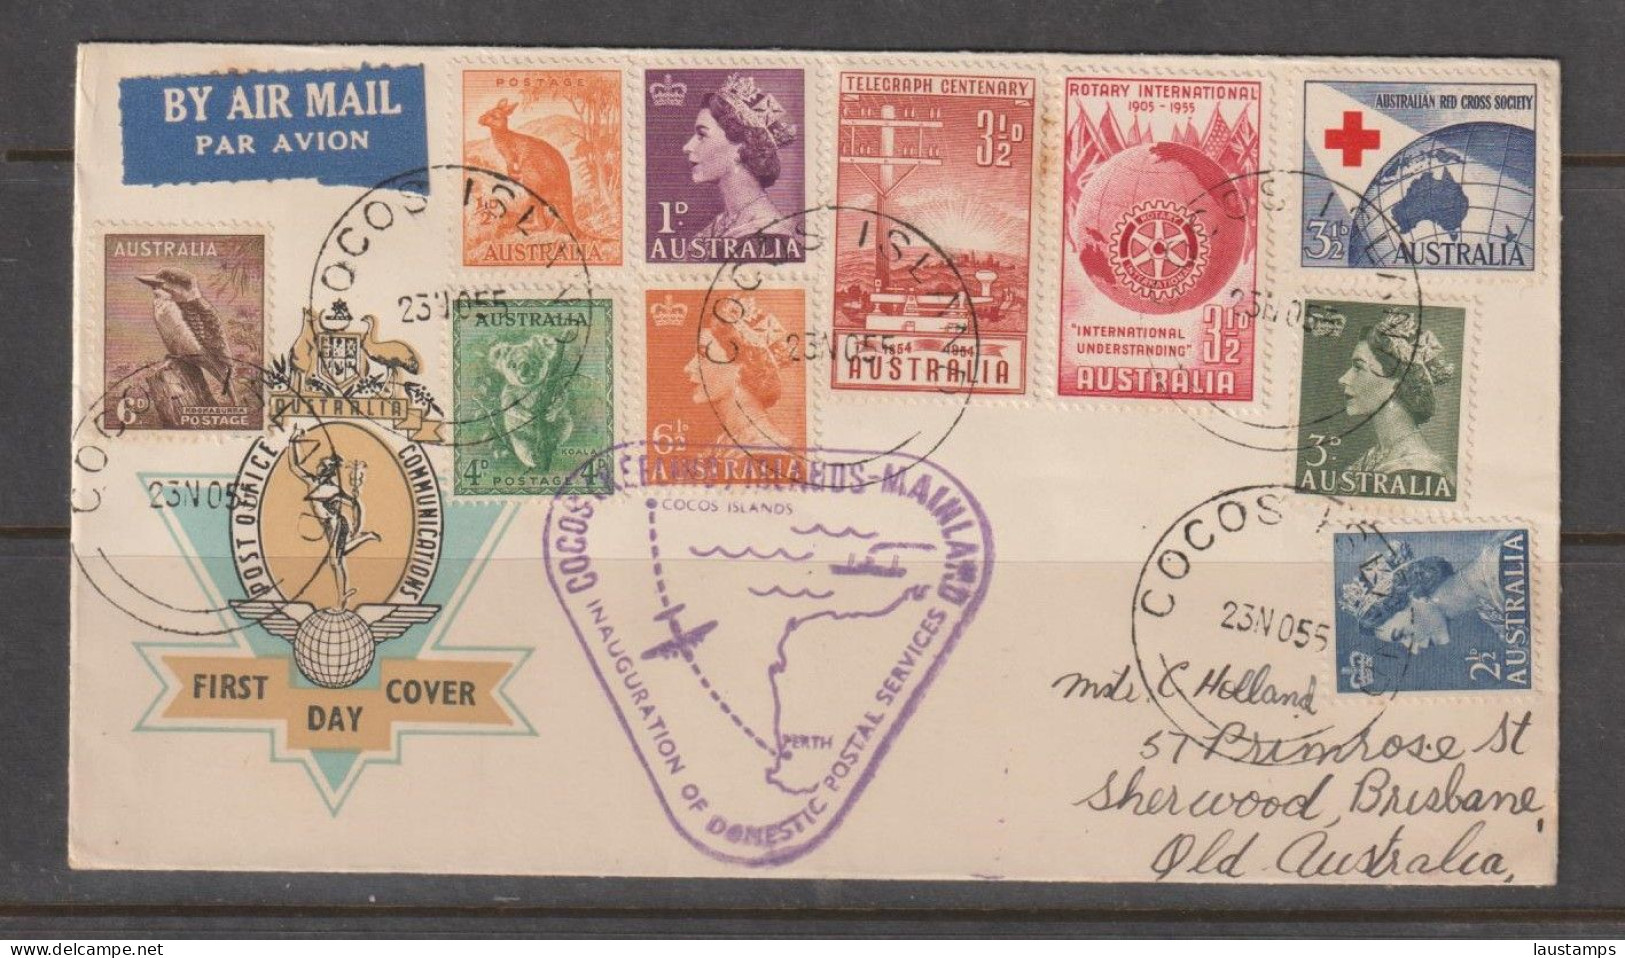 Cocos (Keeling) Islands First Day Transfered To Australia Administration Cover(Dated 23 Nov 55) - Cocos (Keeling) Islands